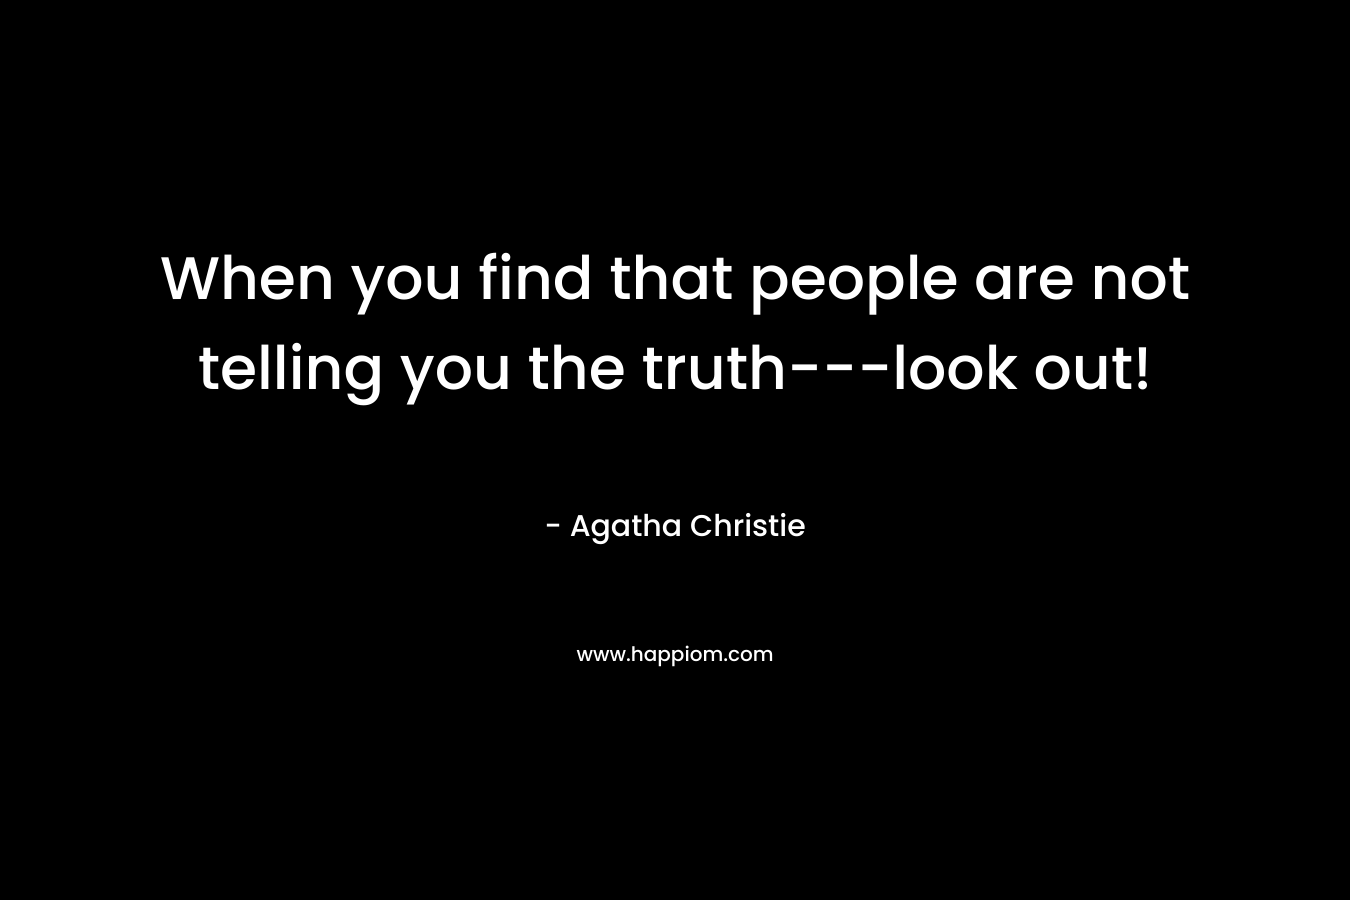 When you find that people are not telling you the truth---look out!